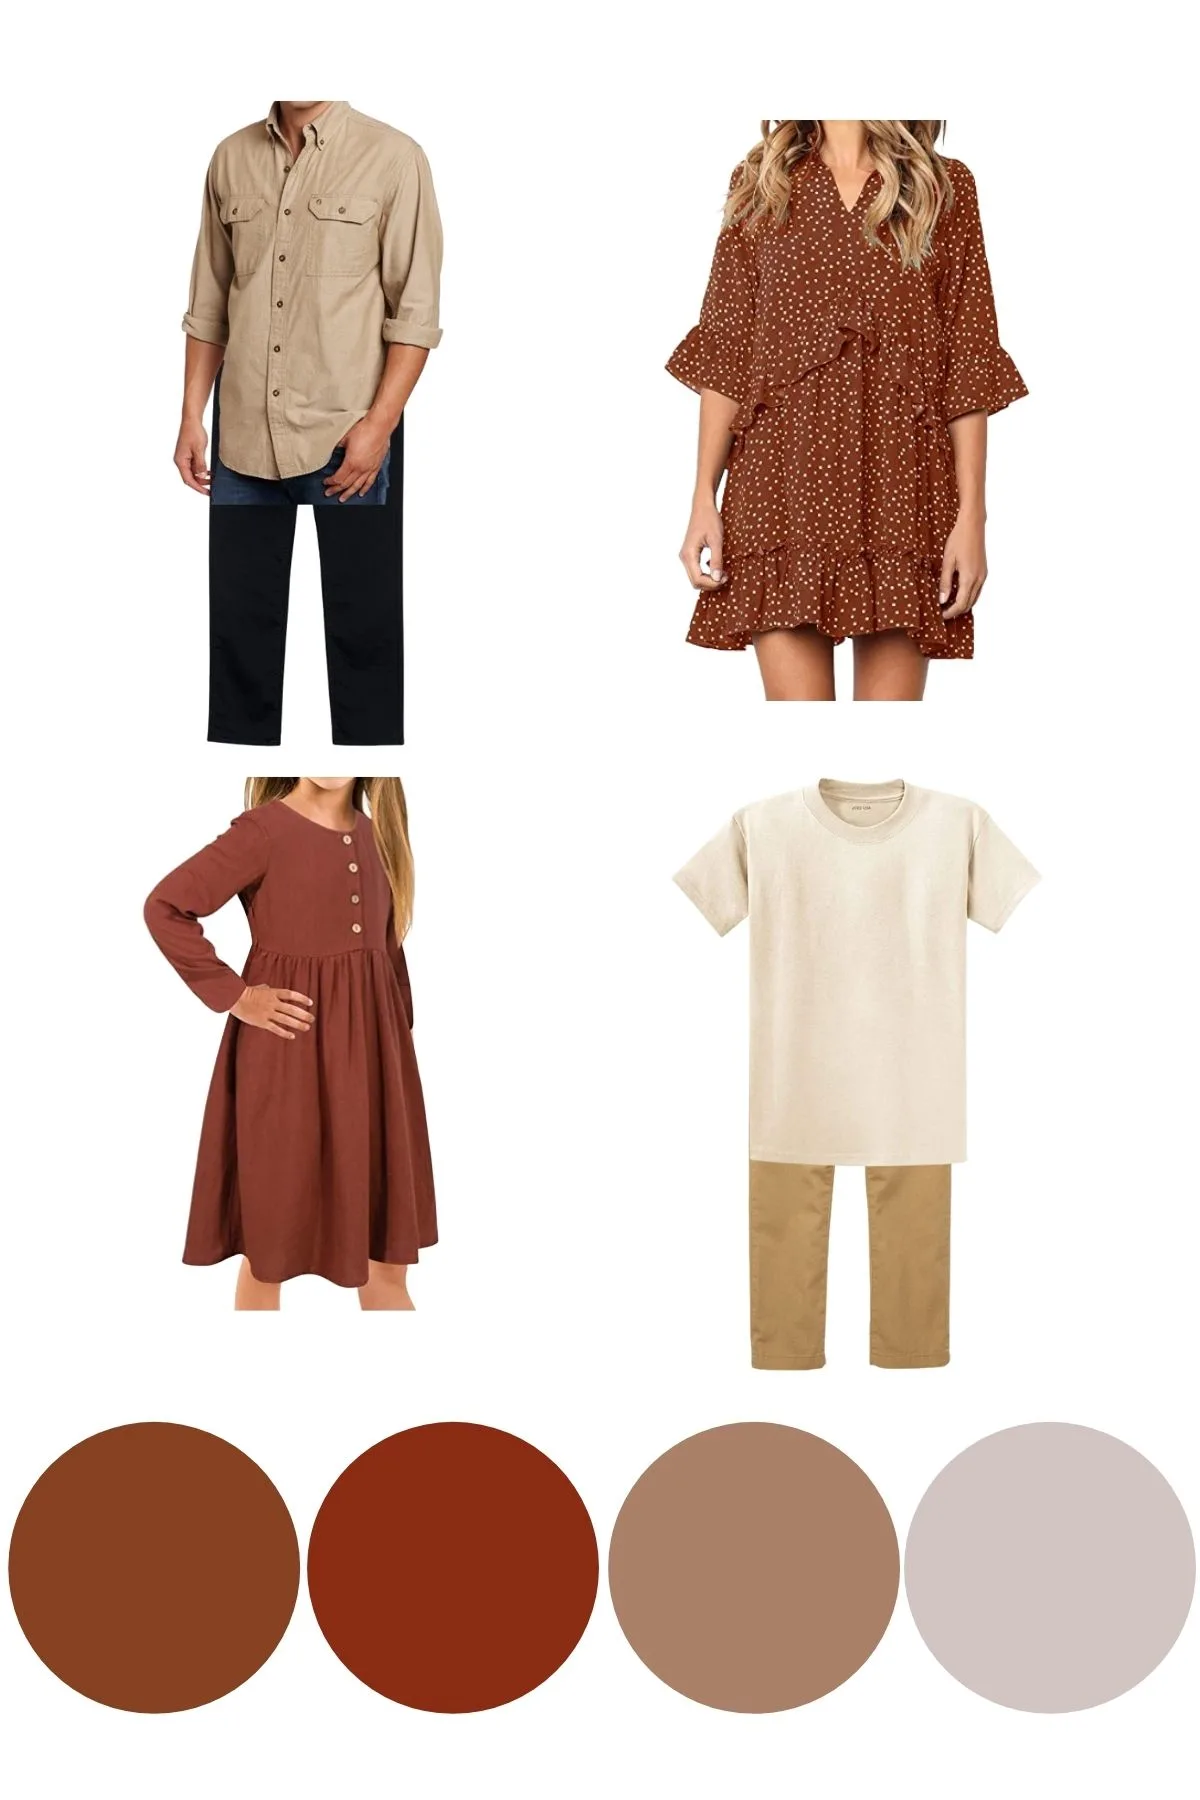 Graphic with desert tone fall picture outfit ideas and colored circles.